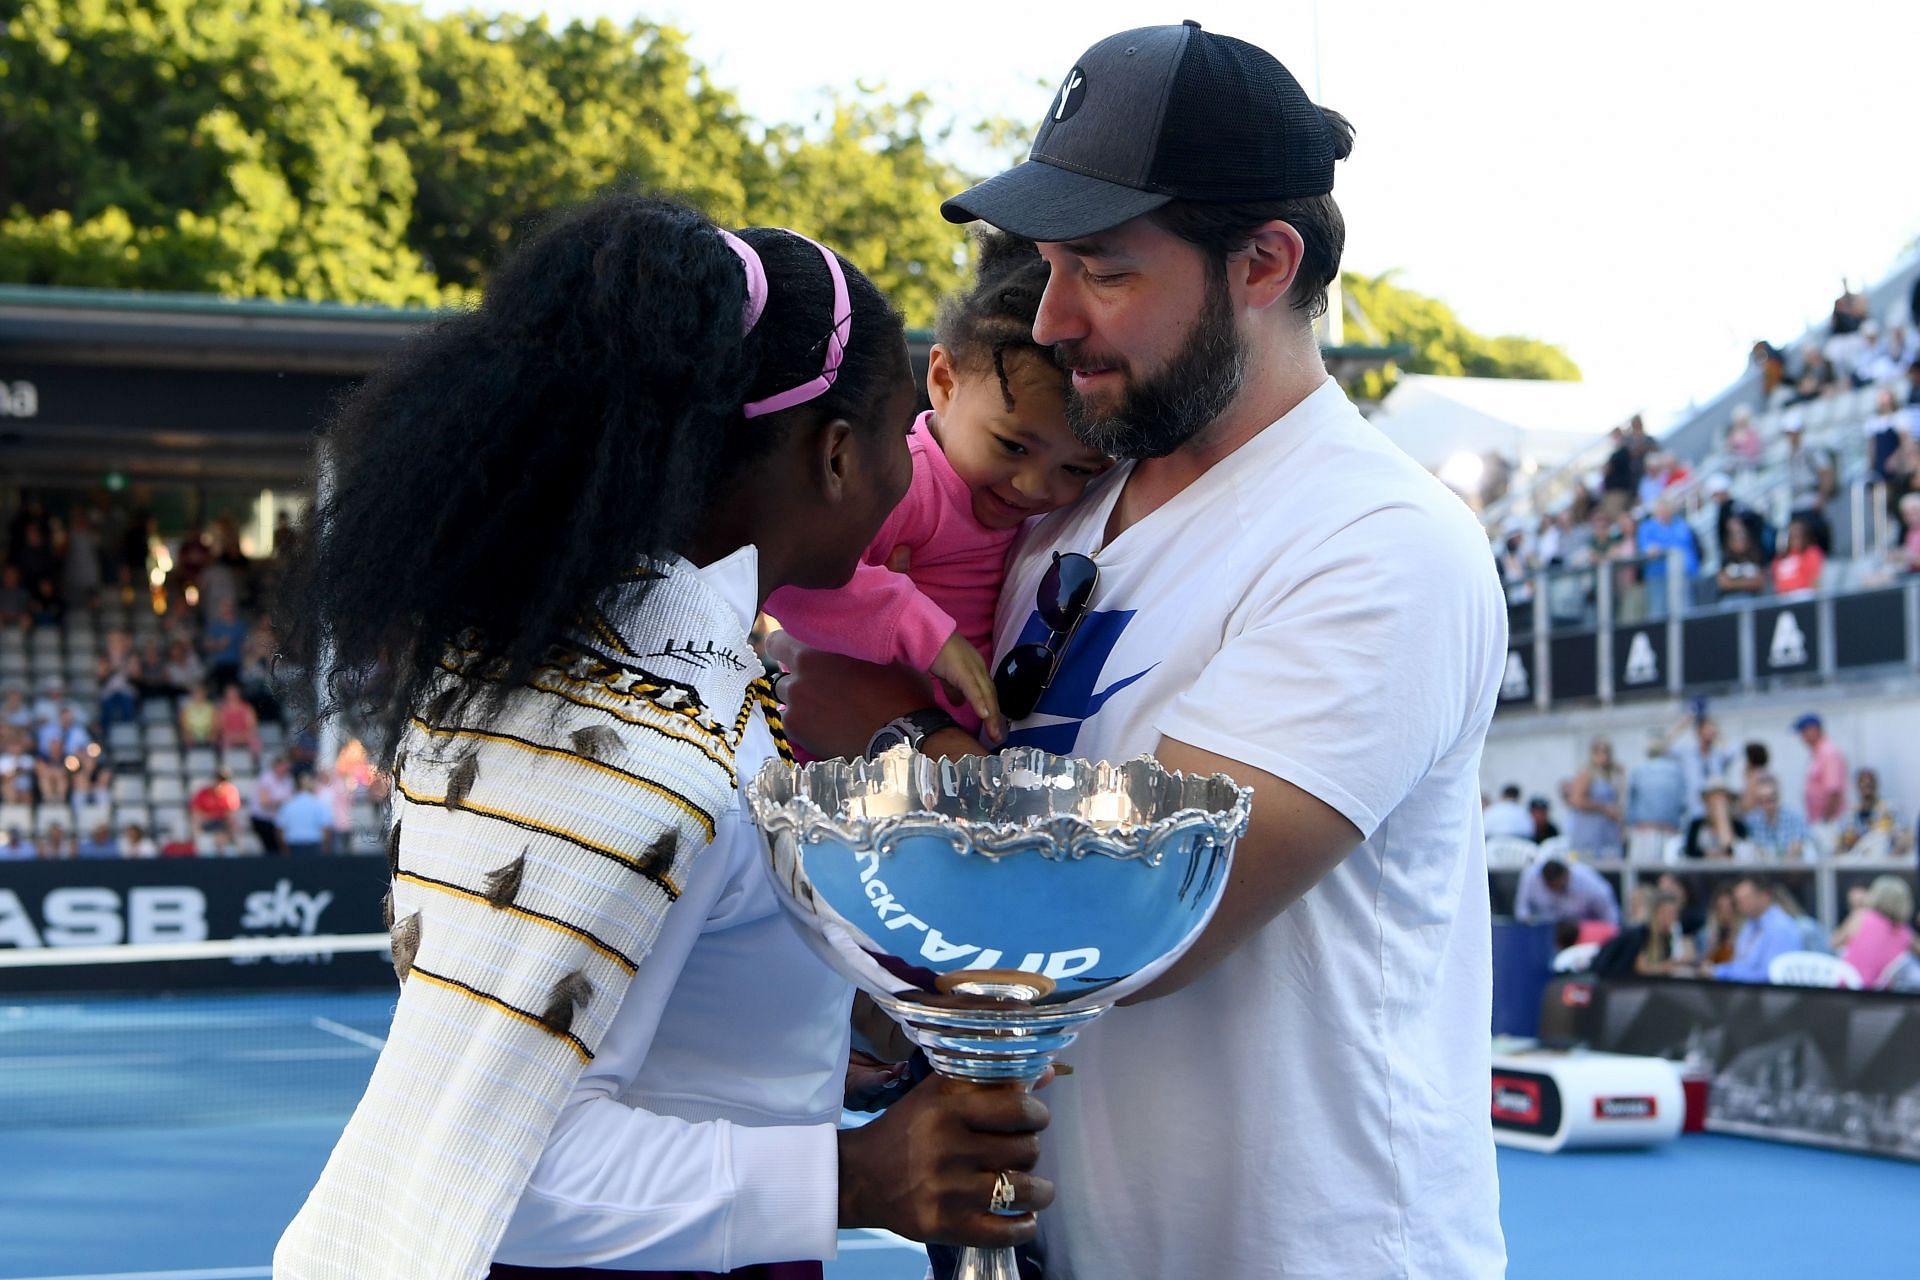 A file photo of Serena Williams with her husband Alexis Ohanian and daughter.